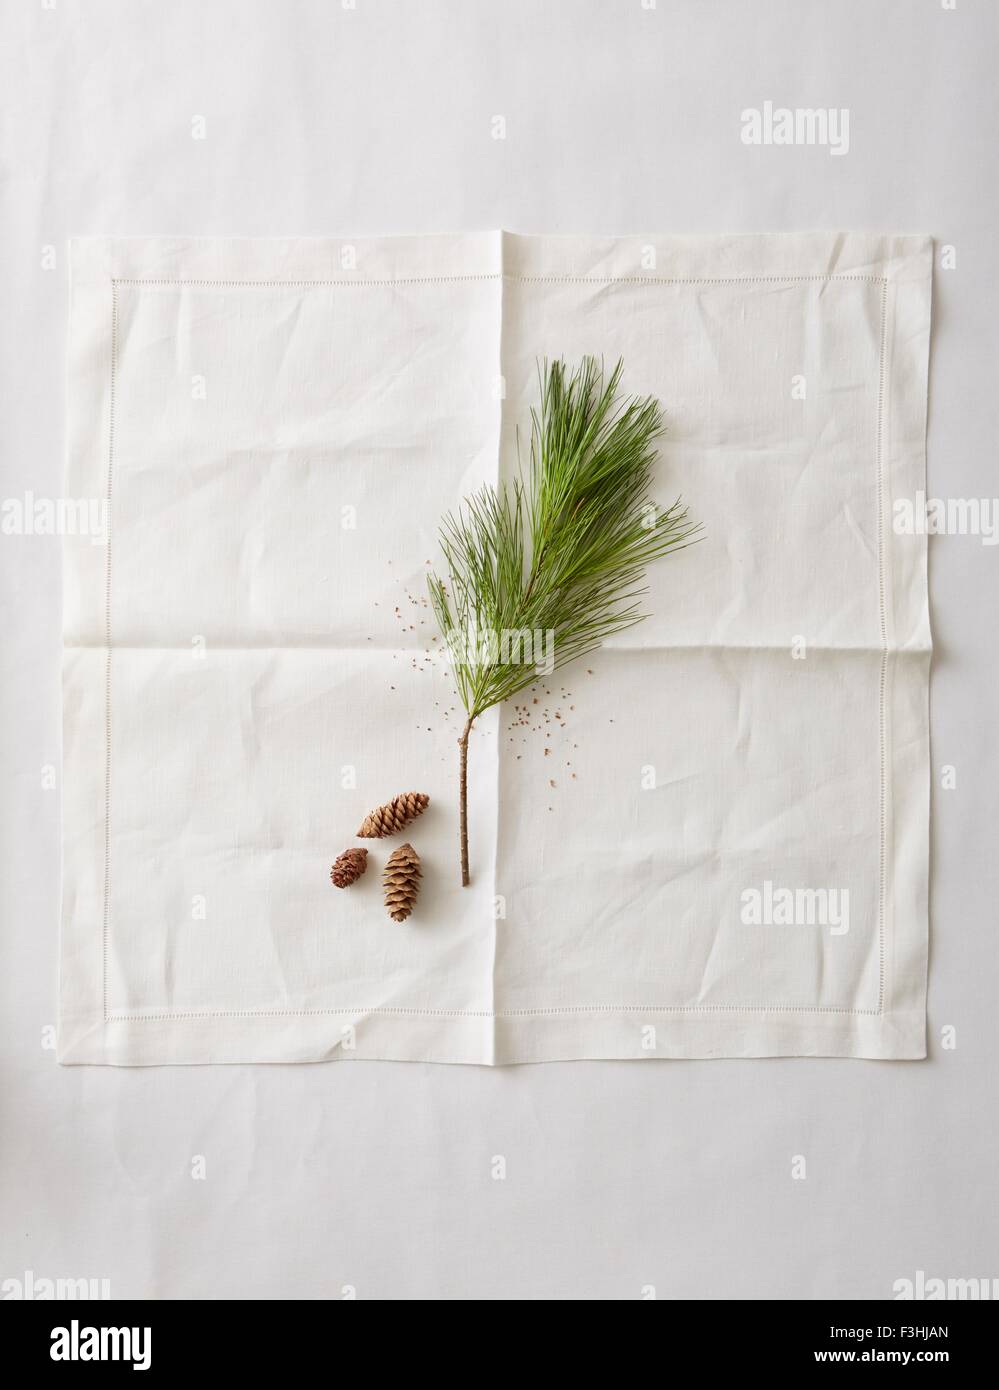 Still life of pine needles and small pine cones on napkin Stock Photo